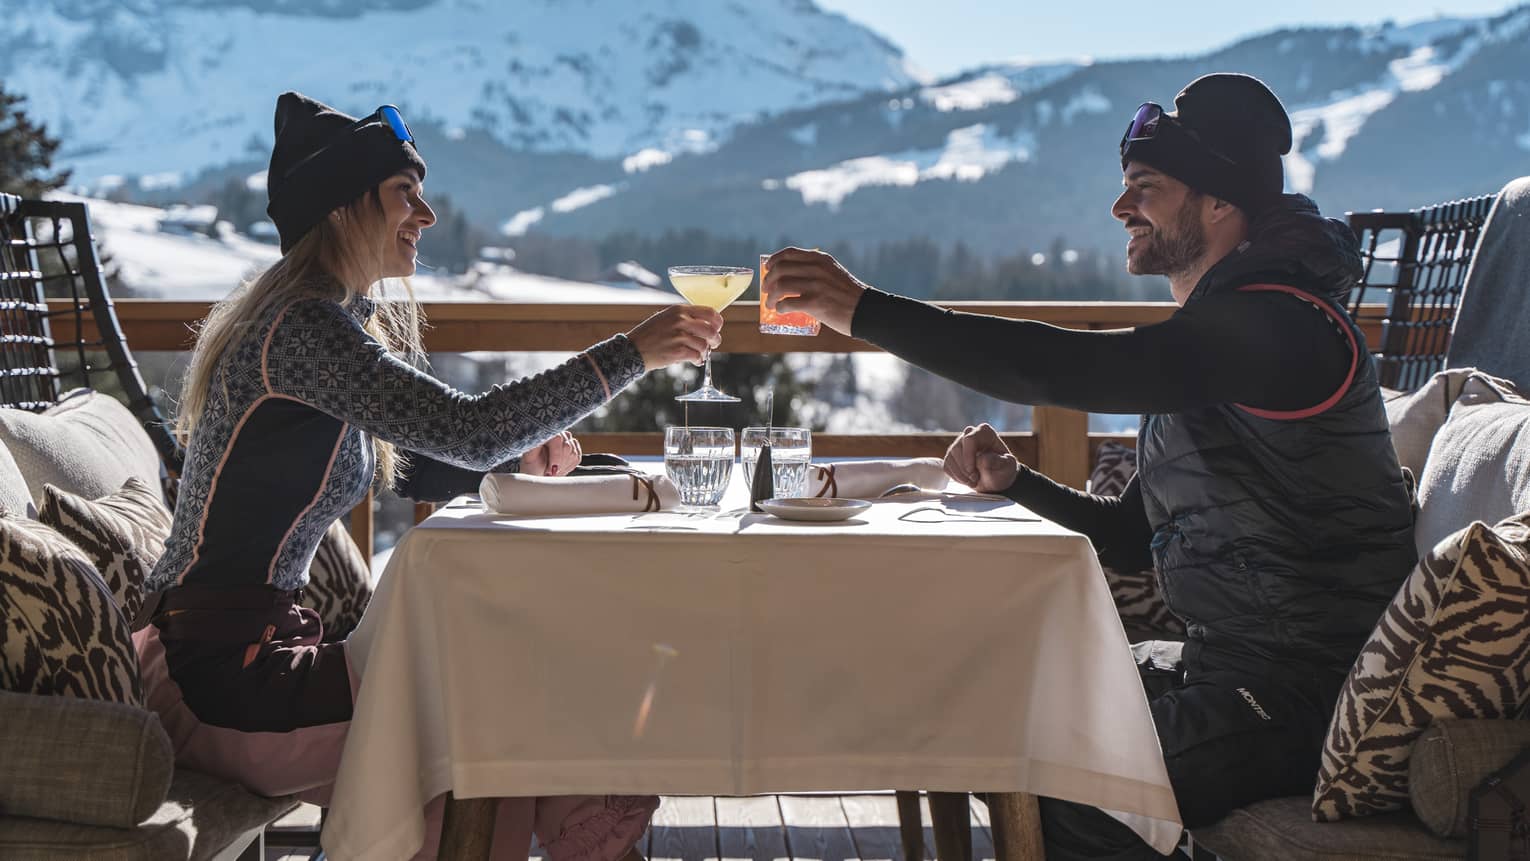 Two people drinking on a patio outside with snowy mountains in the distance